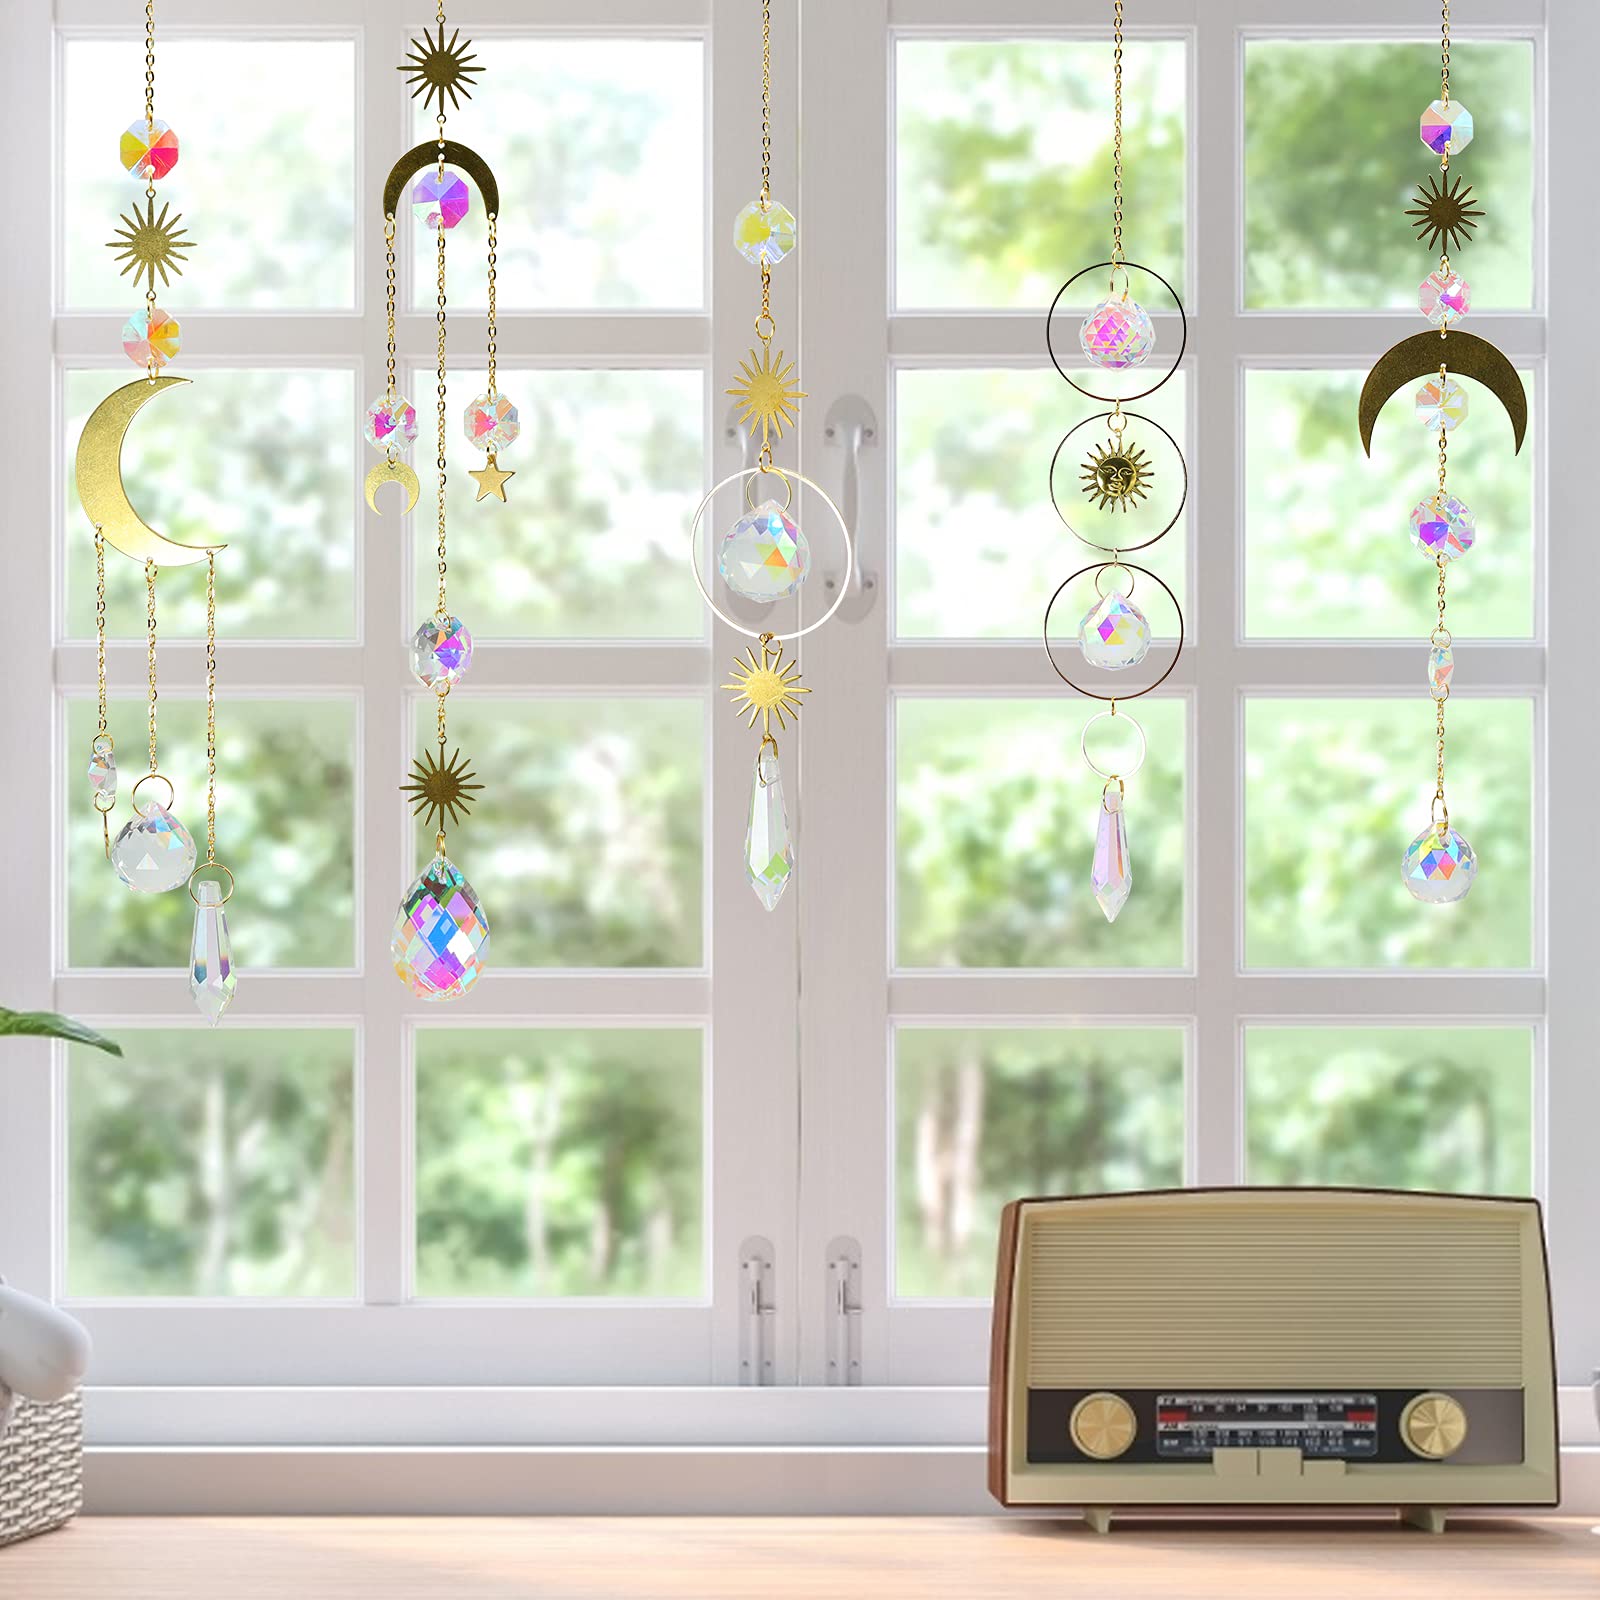 ilclviz 6Pieces Colorful Crystals Suncatcher Hanging Sun Catcher with Chain Pendant Ornament Crystal Balls for Window Home Garden Christ